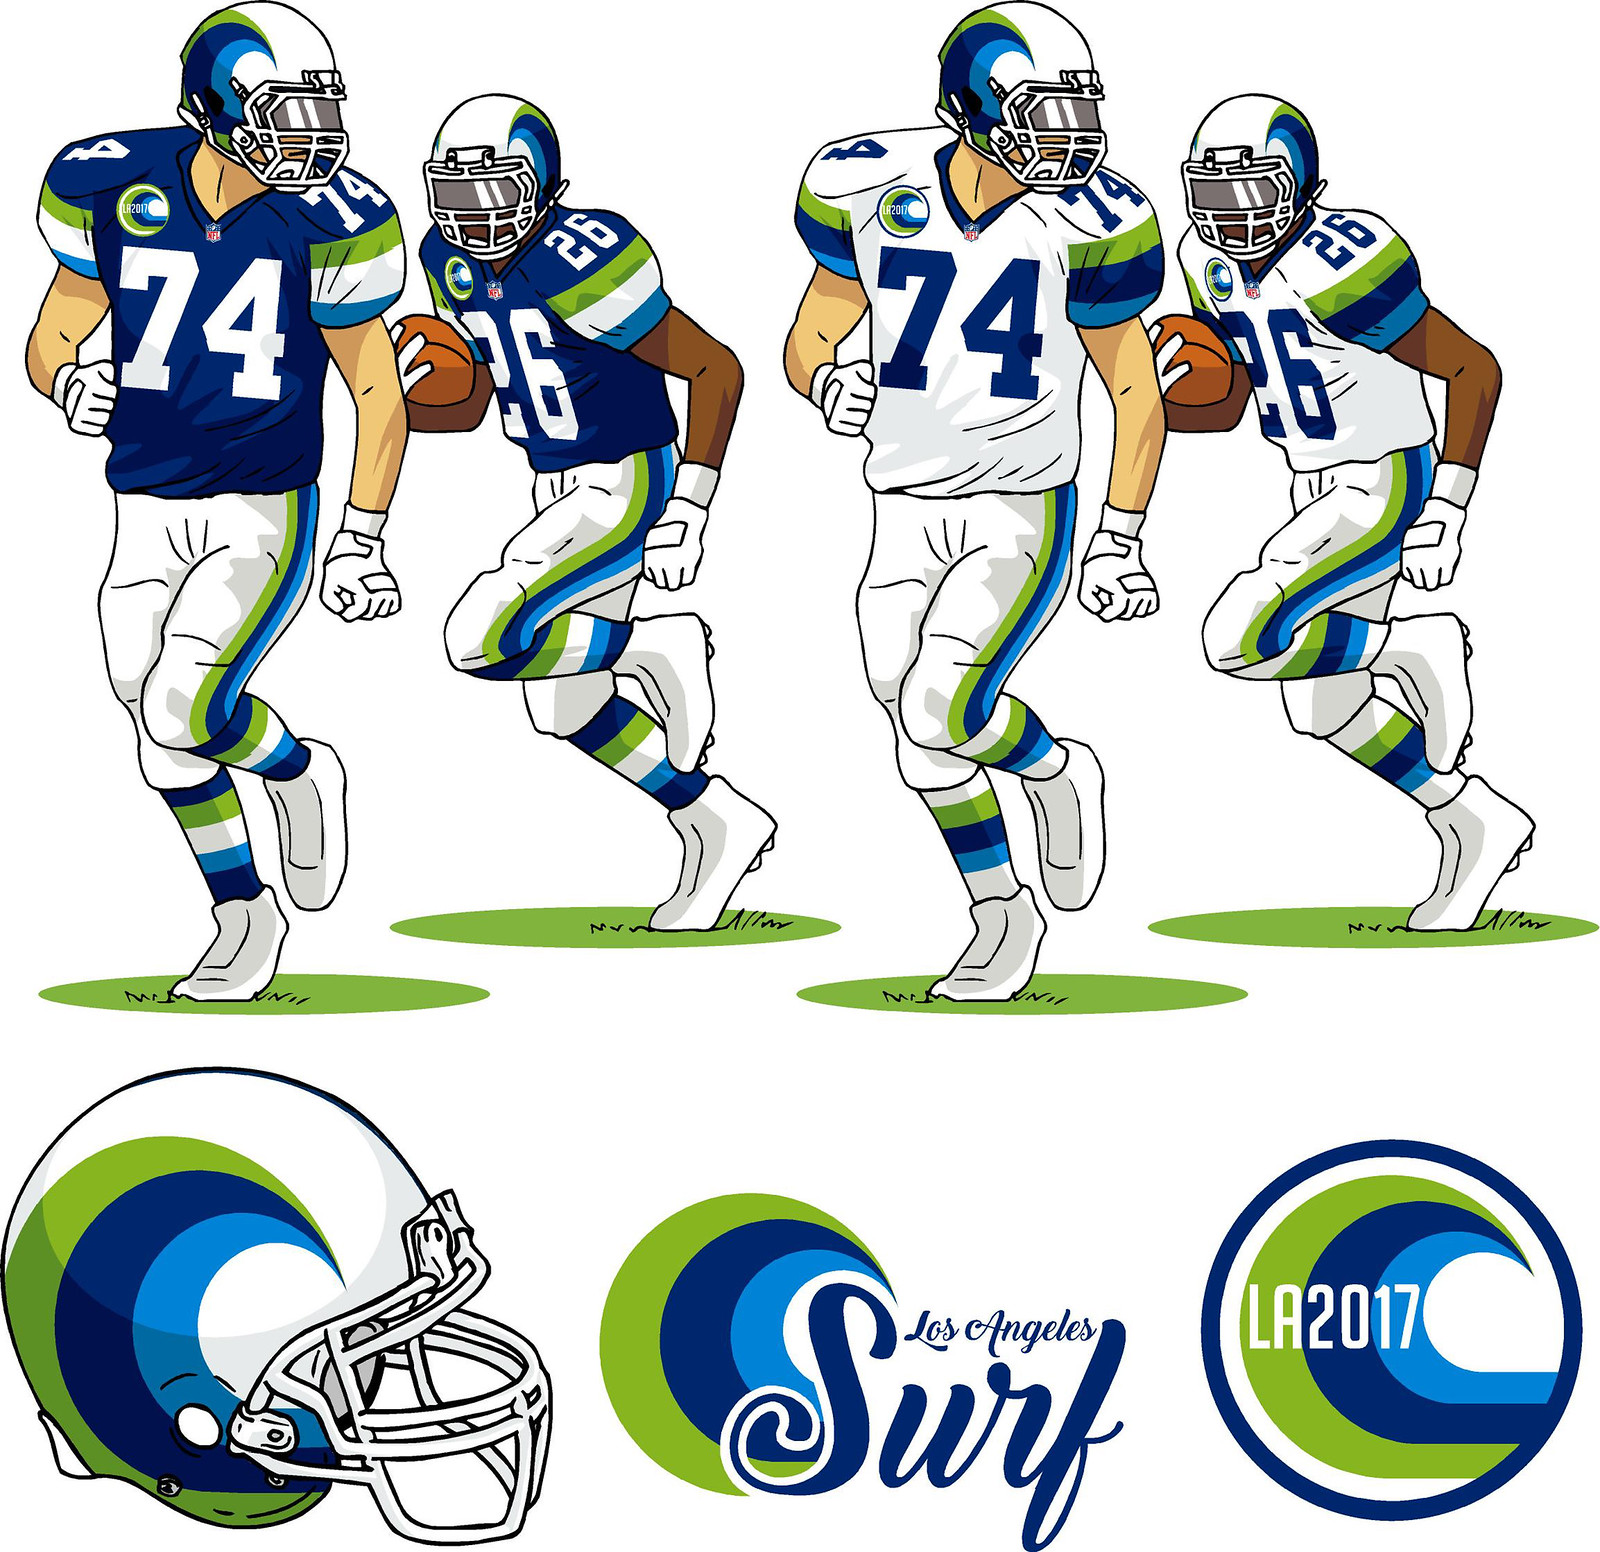 new chargers uniforms 2020